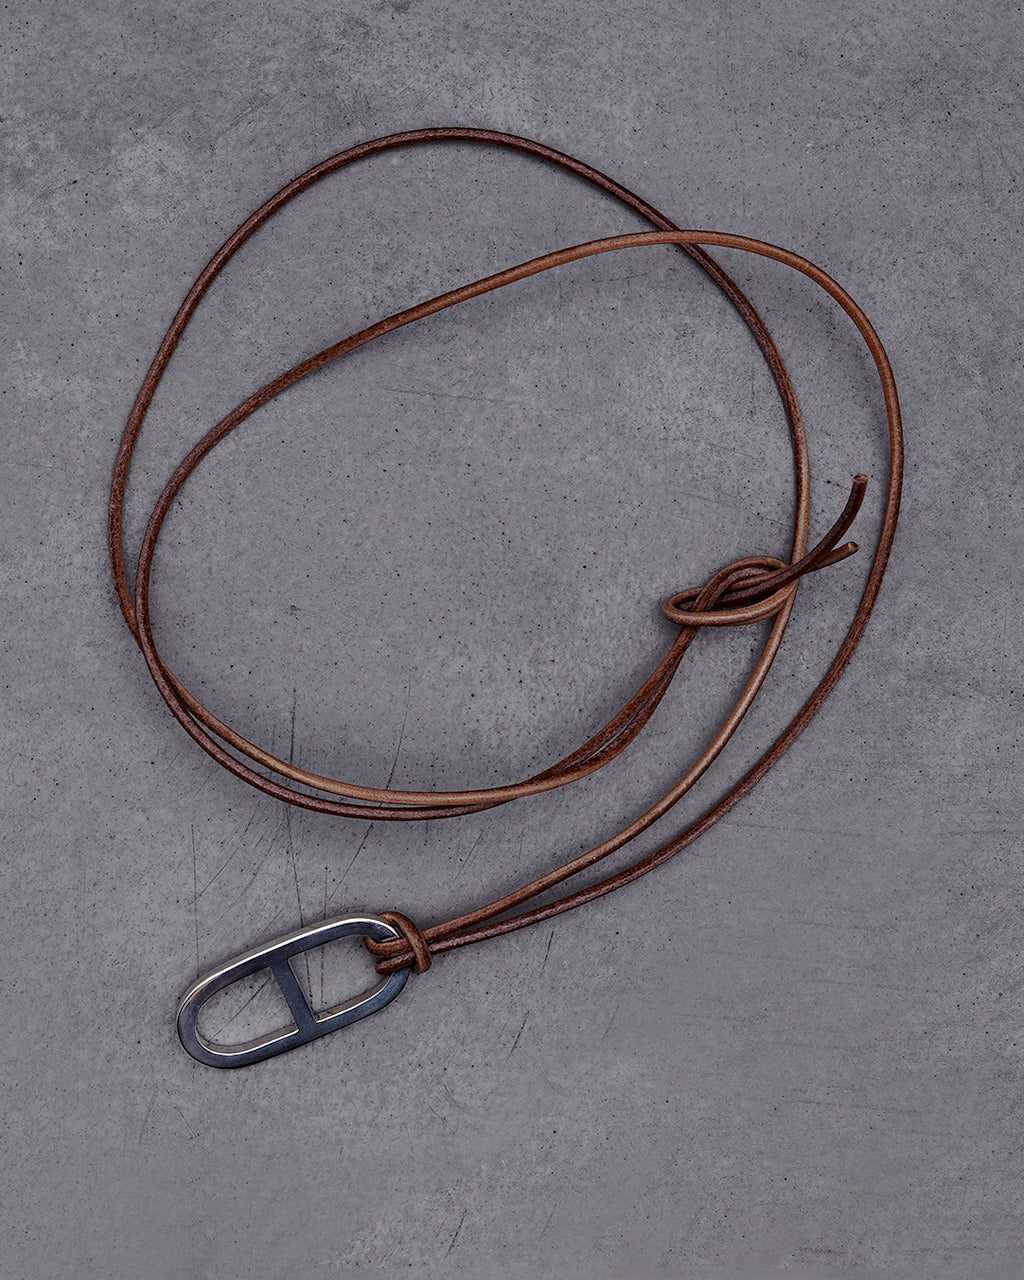 Garden of Eden ガーデンオブエデン アンカー レザー ネックレス ANCHER LEATHER NECKLACE(SMALL)  シルバー925 アクセサリー 22AW005【送料無料】